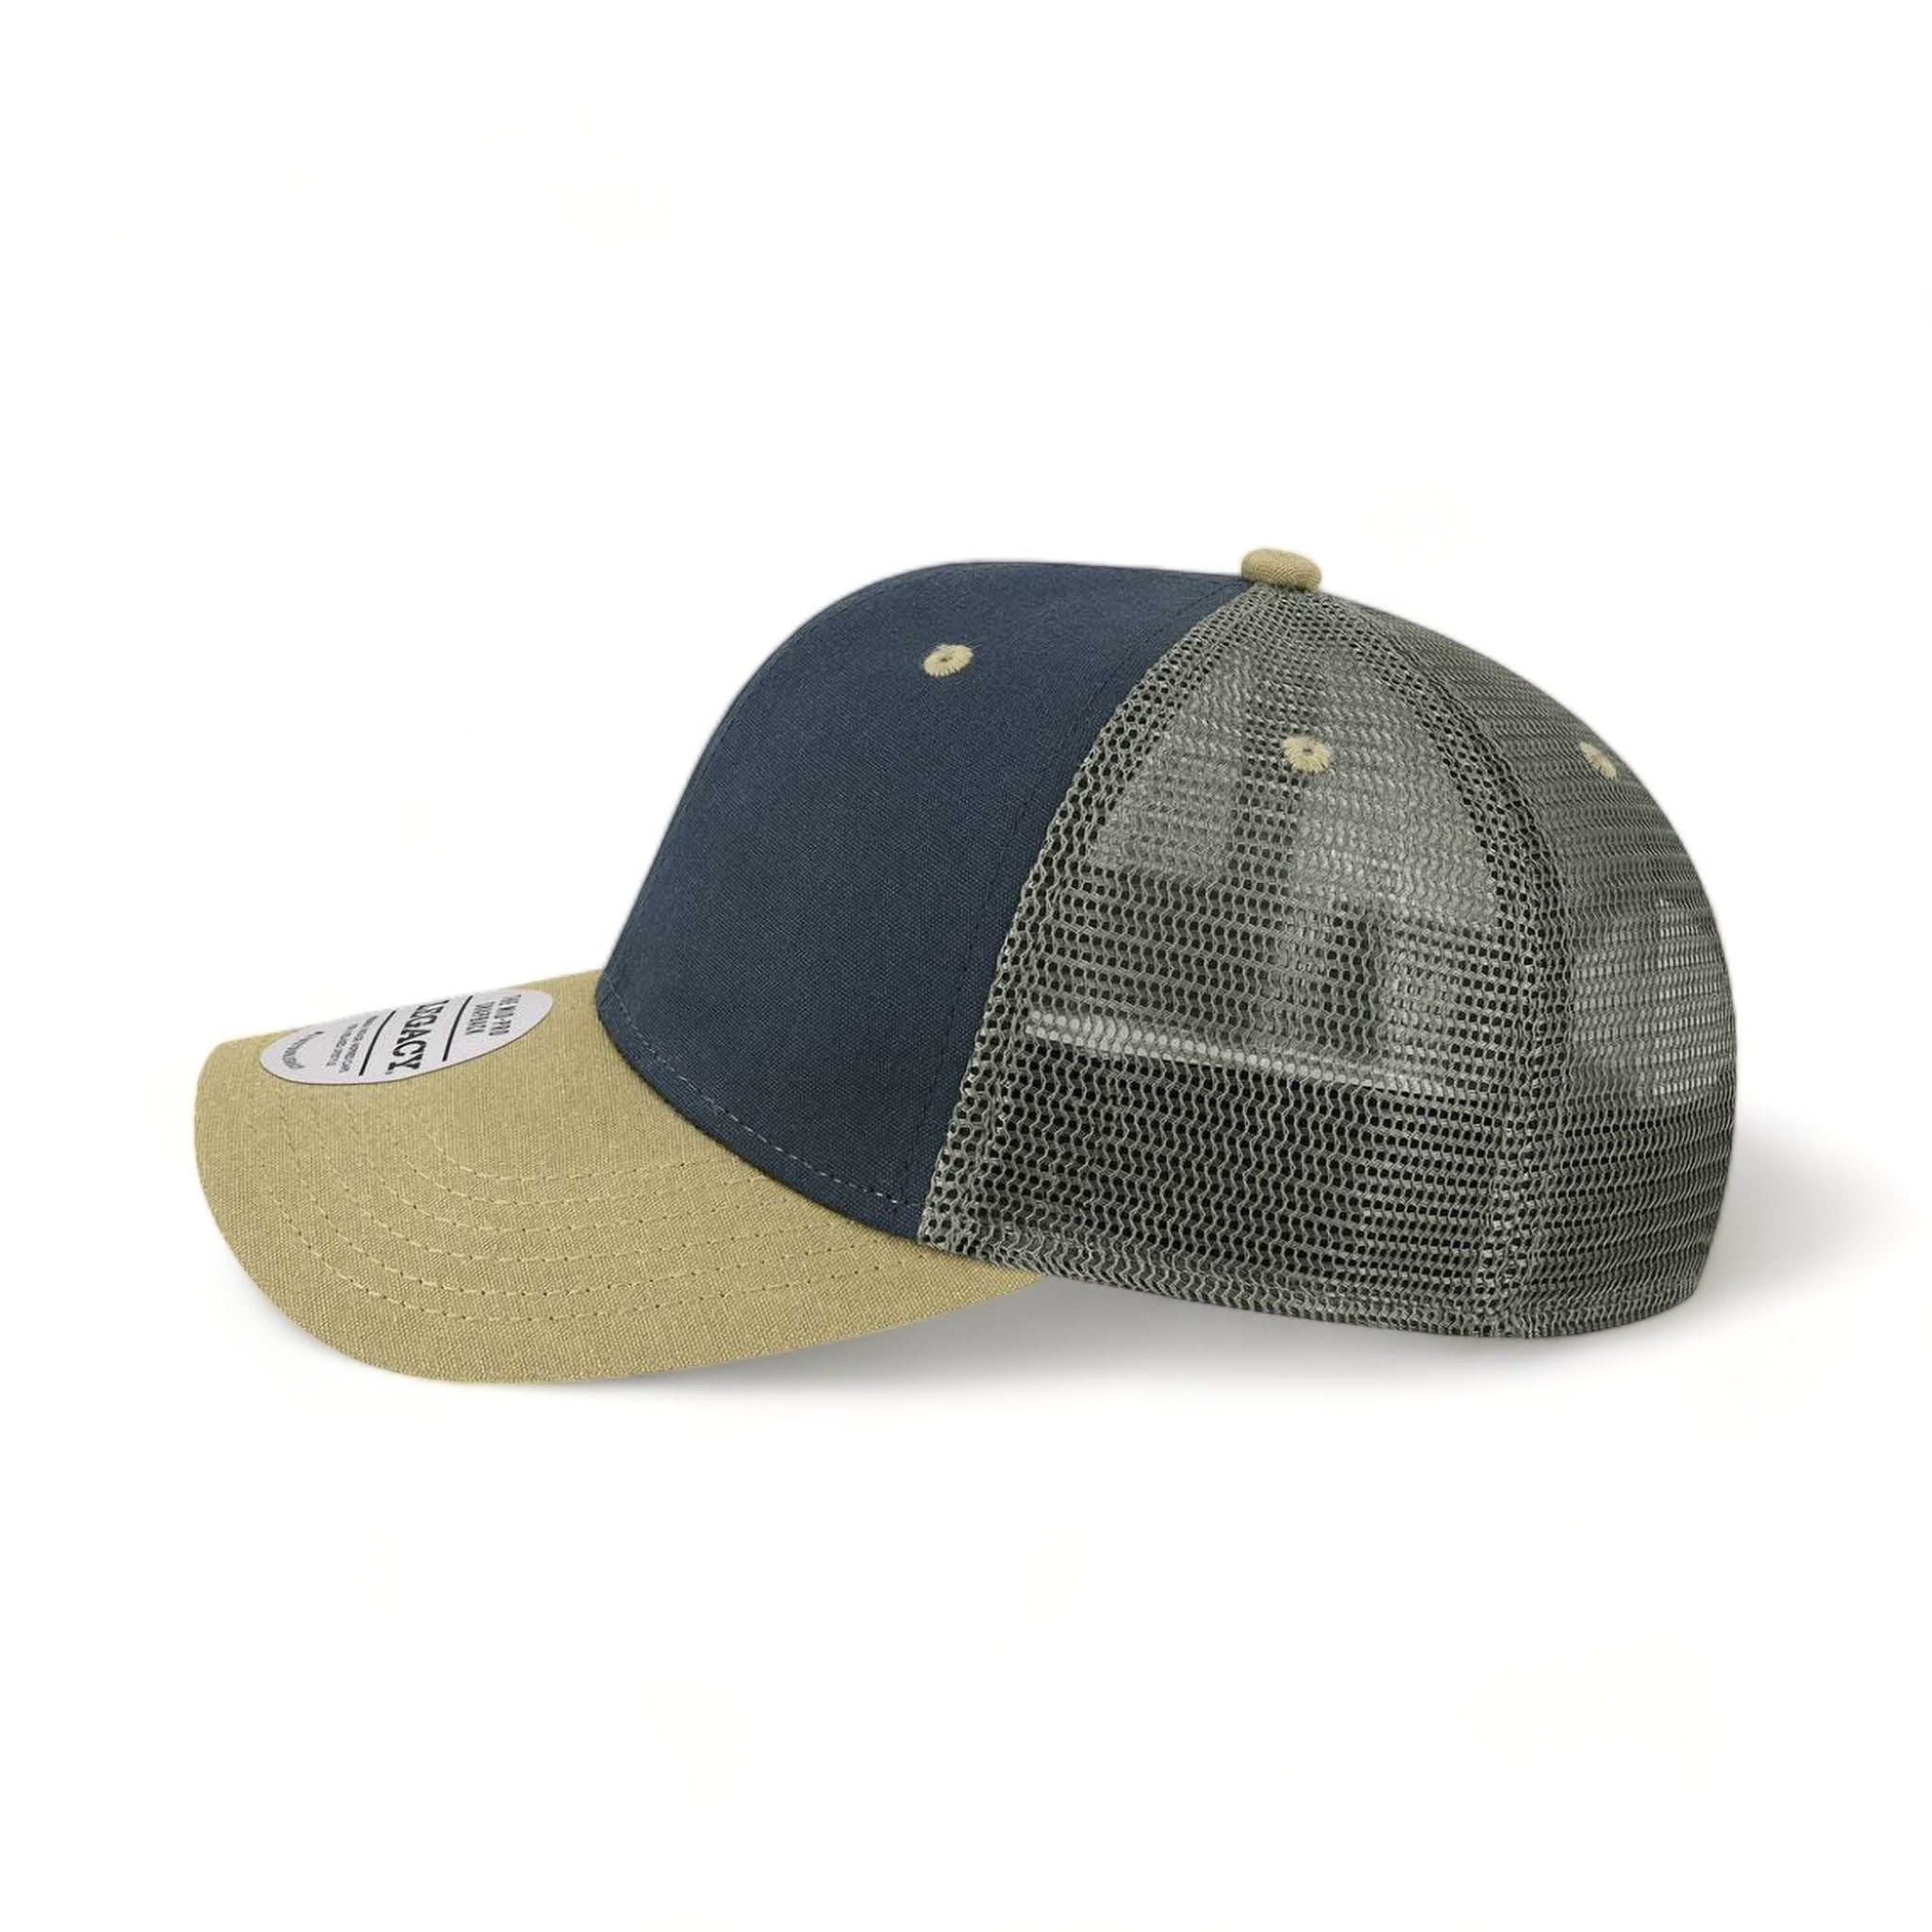 Side view of LEGACY MPS custom hat in navy, vegas and dark grey